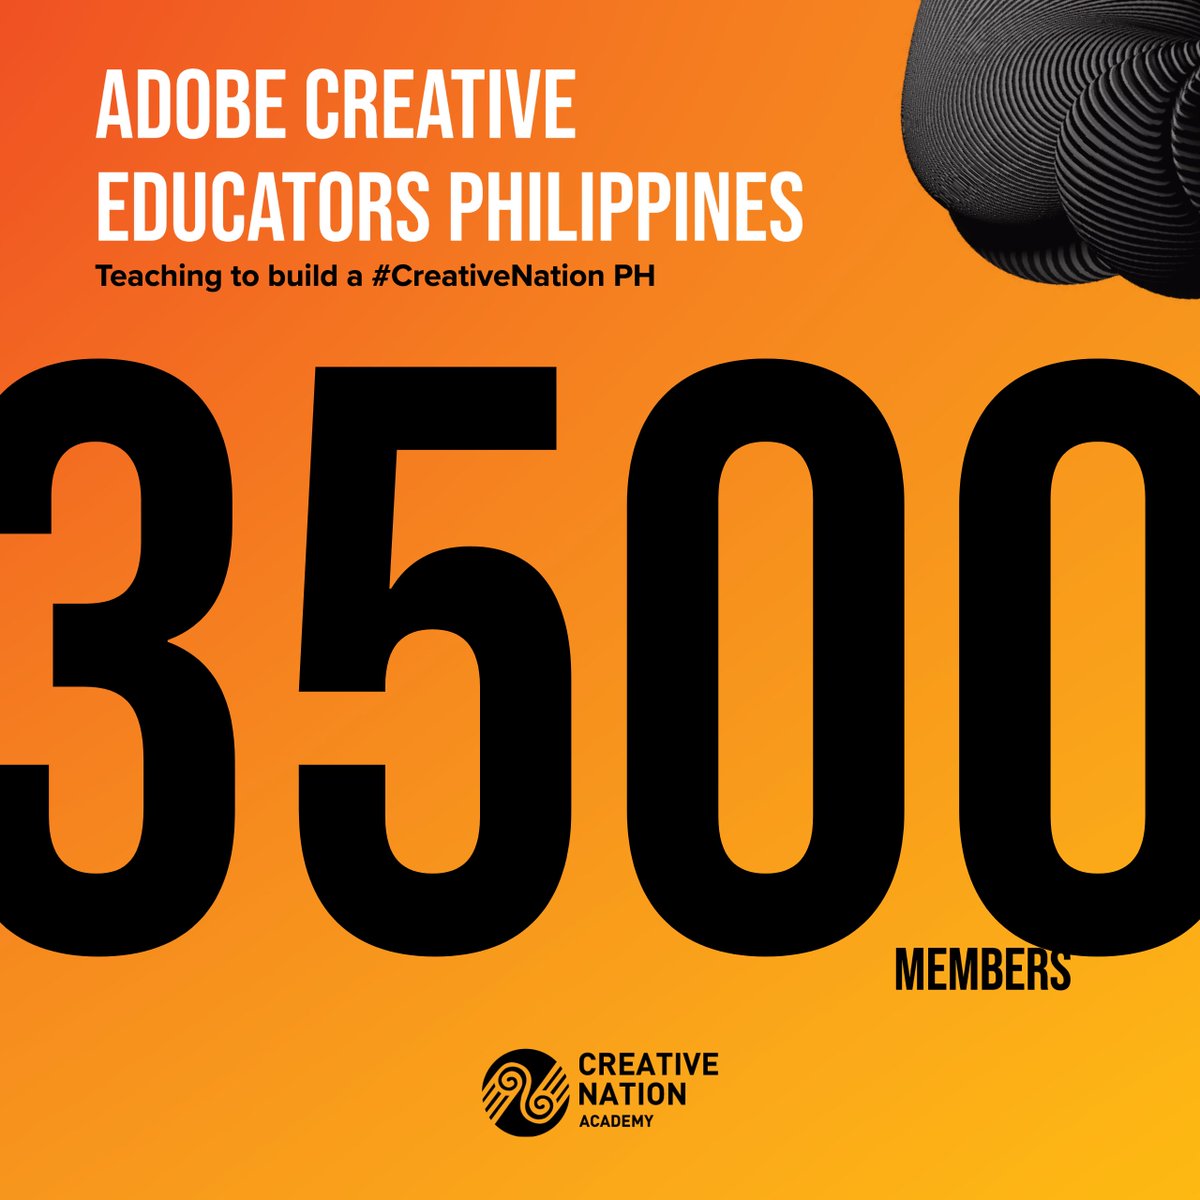 Thank you for making this possible, 3500+ members can counting for Adobe Creative Educators Philippines. 

Join now and be part of building a #creativenationph #ccevangelistph #adobeeducrative 

facebook.com/groups/adobece…